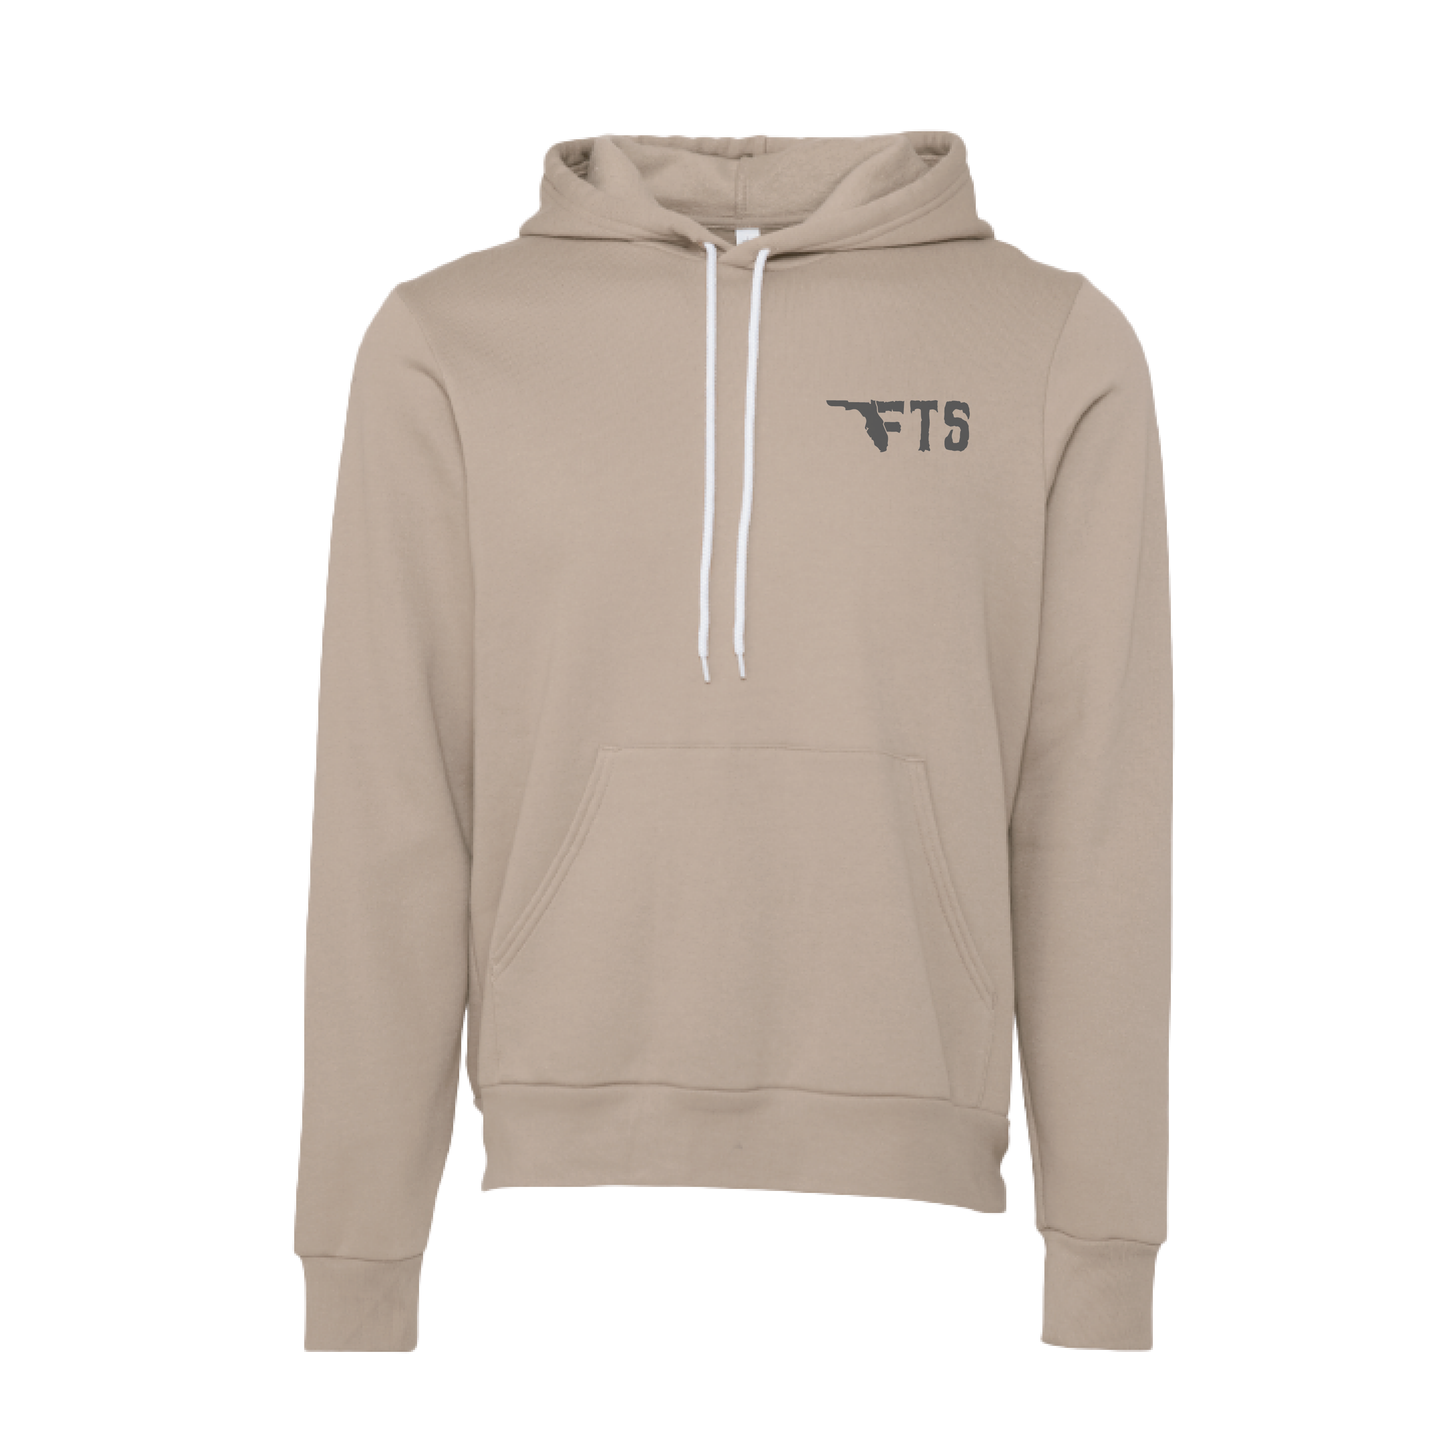 FTS Classic Logo - Shirt, Tank Top, or Hoodie - Available in Multiple Colors